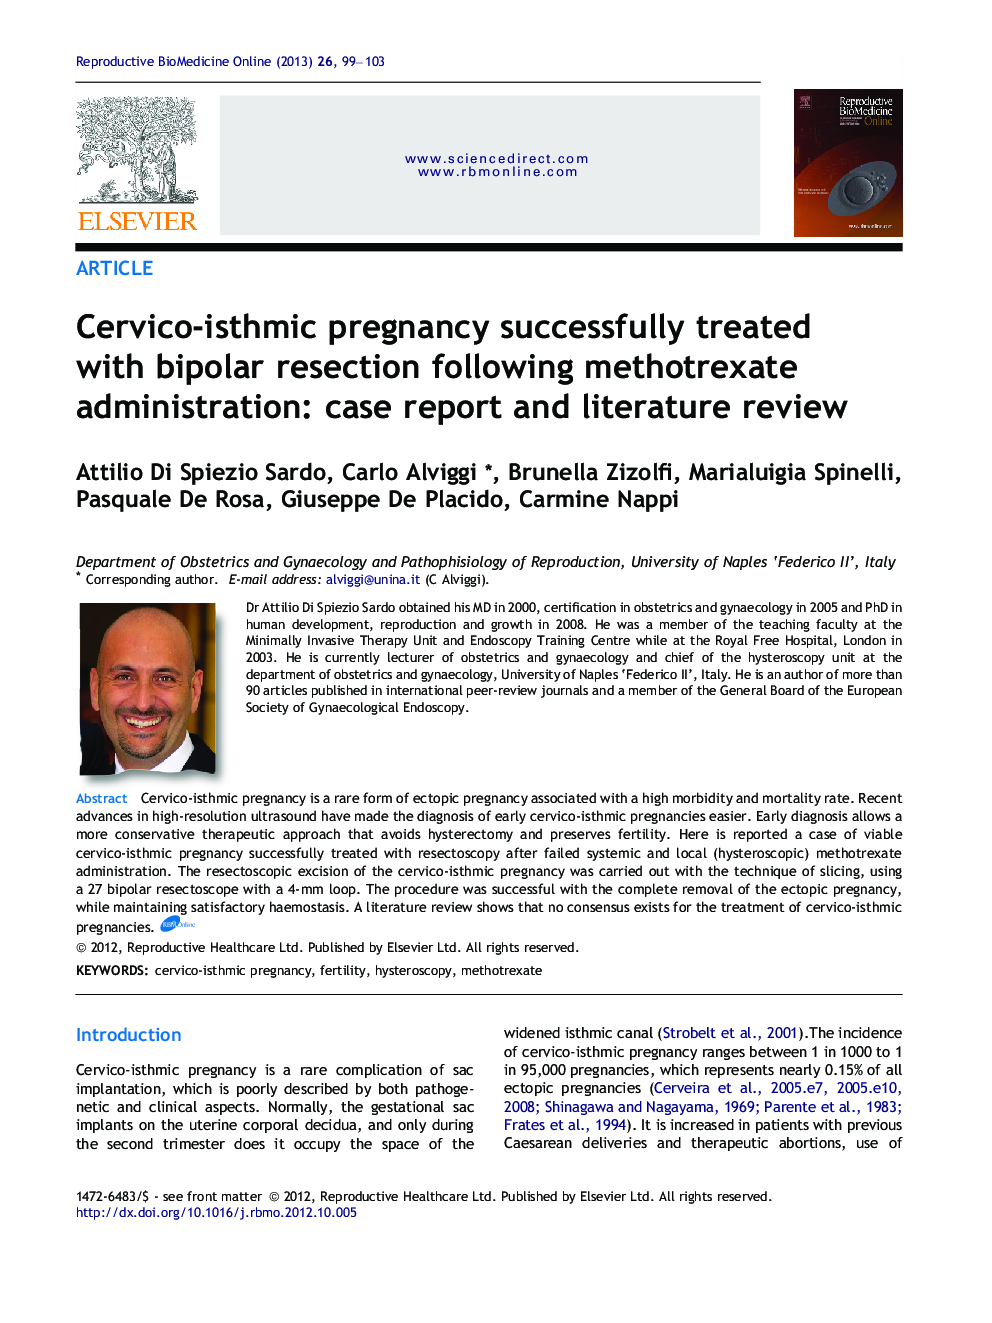 Cervico-isthmic pregnancy successfully treated with bipolar resection following methotrexate administration: case report and literature review 